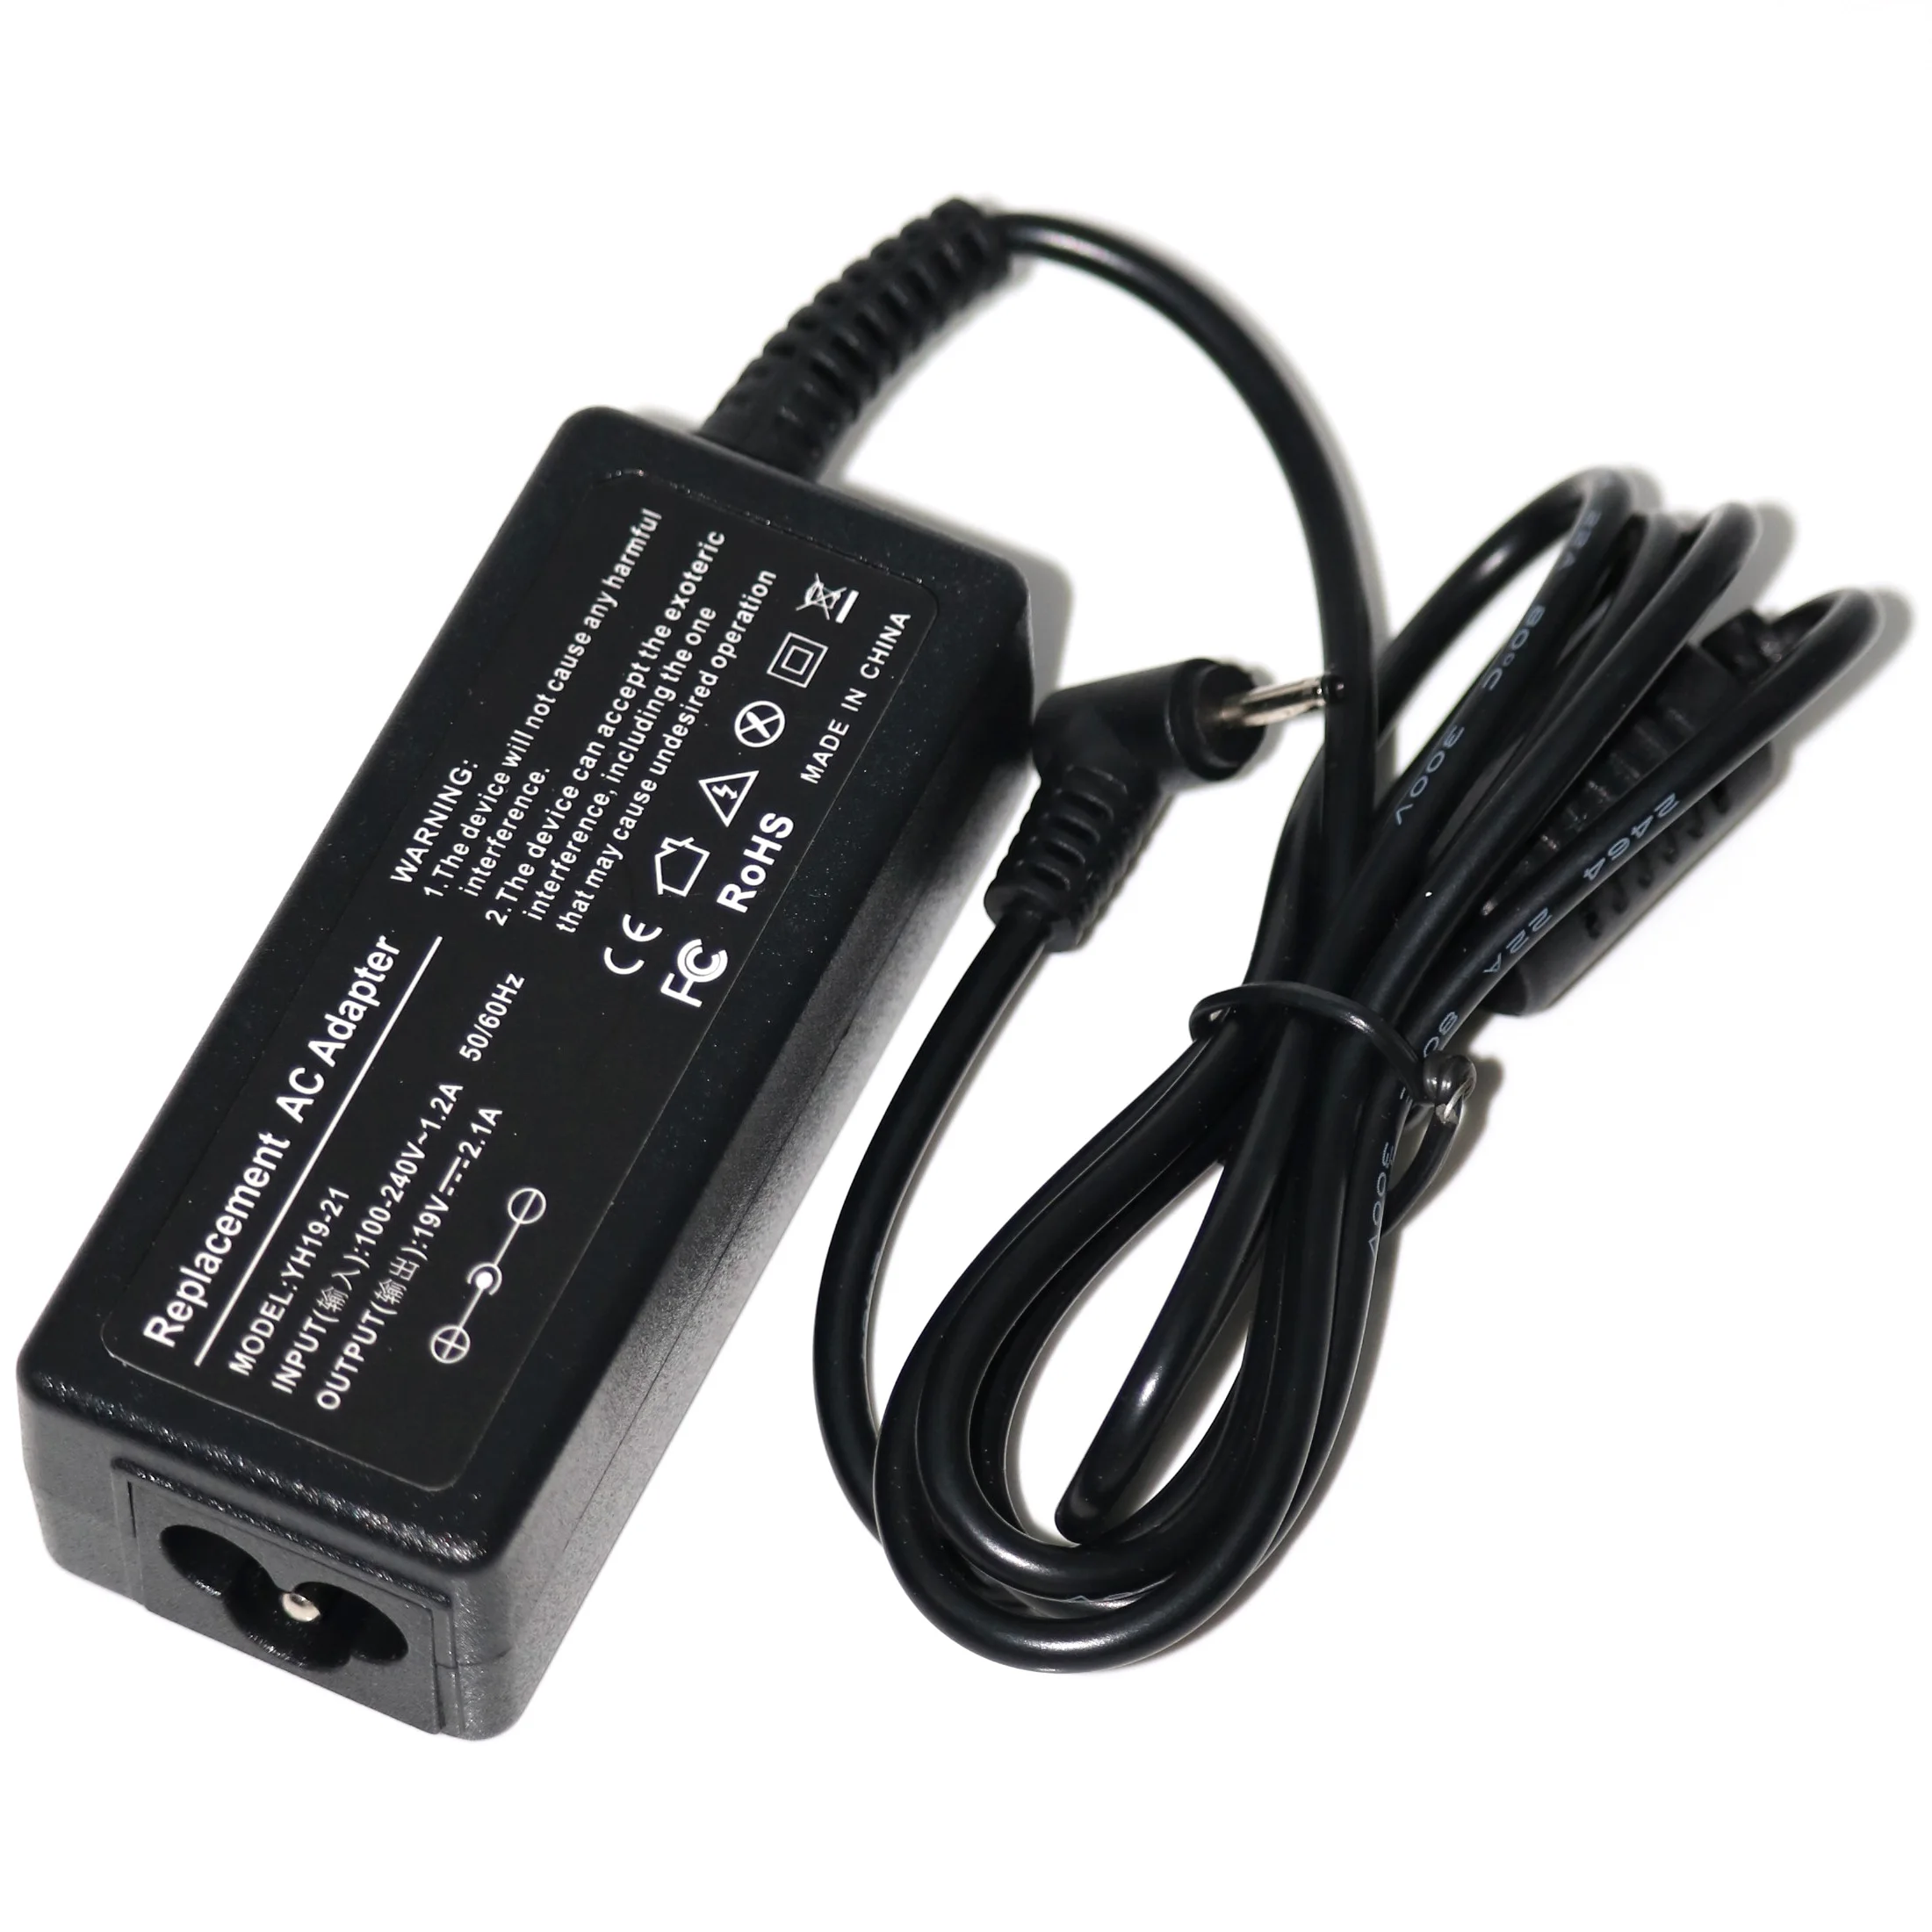 

19V 2.1A AC Power Adapter Laptop Charger For asus EeePC X101CH T101H 1005HAB PC 1005 1005HA 1005PE 1201AC 1001HA 1001P 1001PX